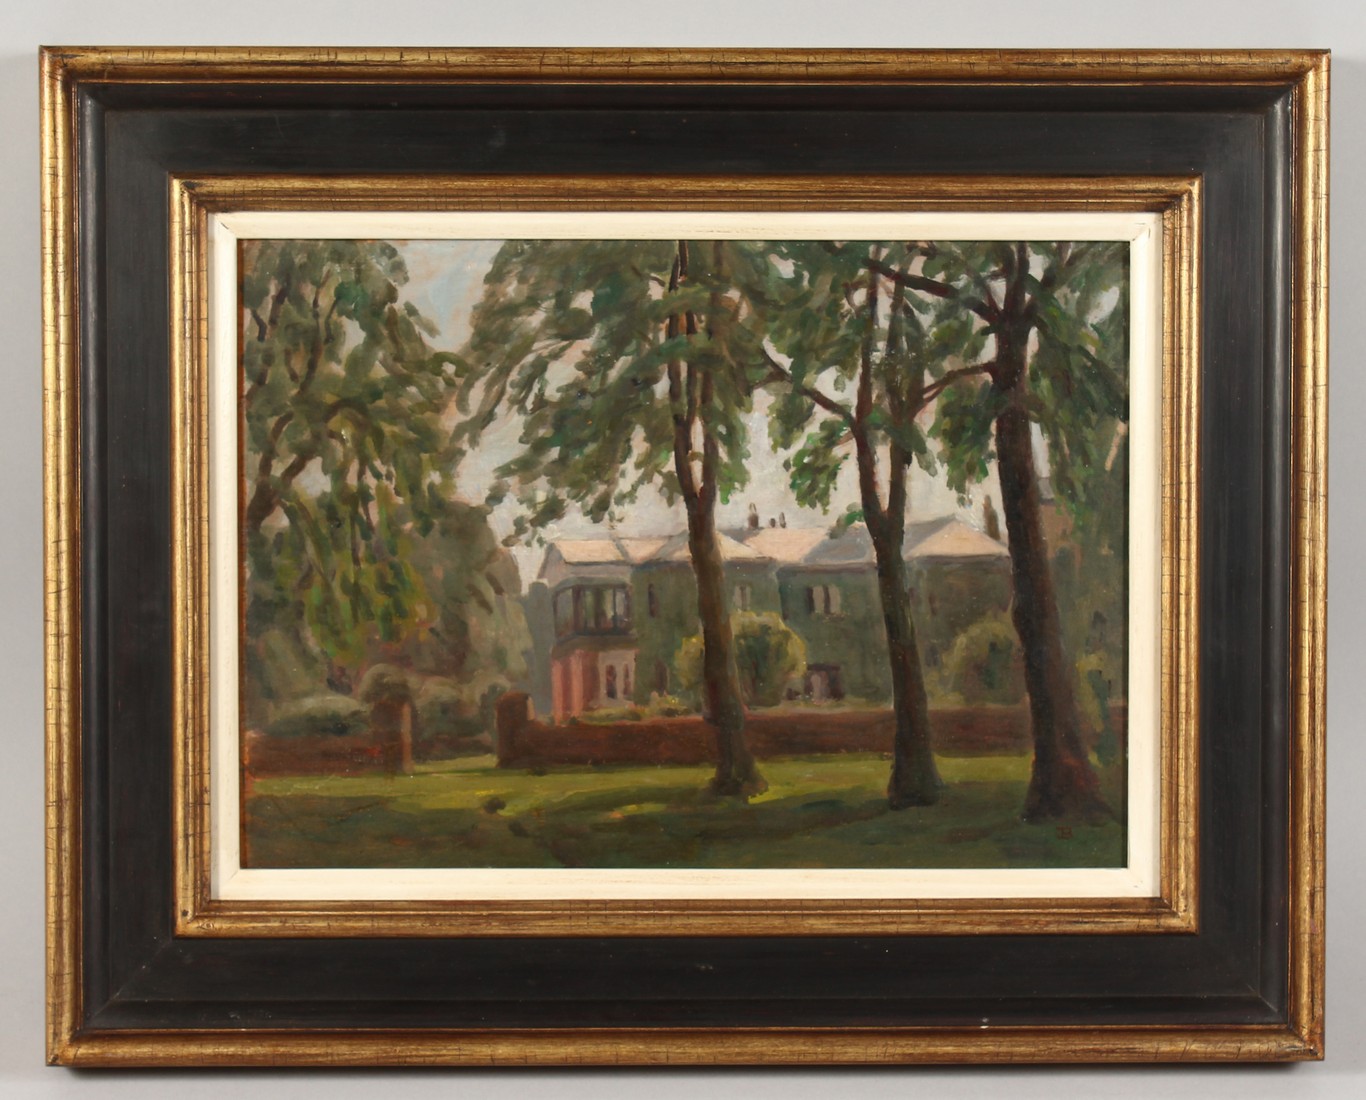 JOHN BROWN A house through the trees. Monogrammed. Oil on panel. 9.5ins x 13.5ins. - Image 2 of 3